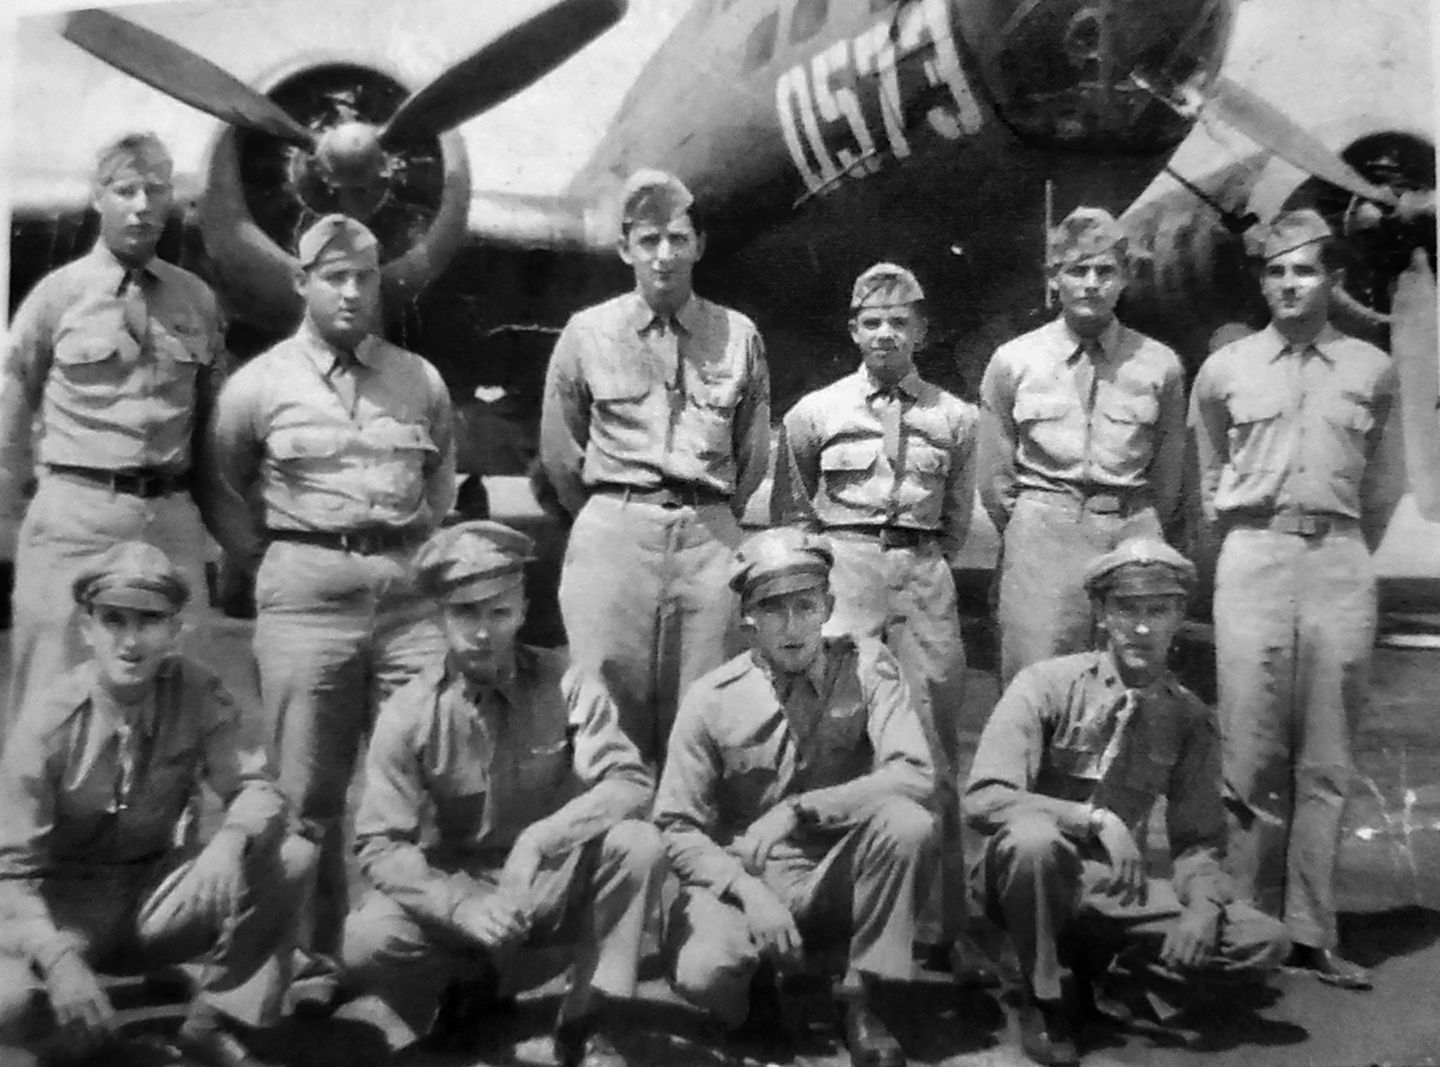 Crew of the B-17 “Kwitchurbitchin” (standing, from left): Clyde Dwight, Malcolm Vignes, Michael Joyce, Jack Taylor, Kenneth Snow, Kenneth Tucker. (Kneeling, from left): Louis Dunigan, James Garrison, Halsey Nisula, Donal McQuistion. 